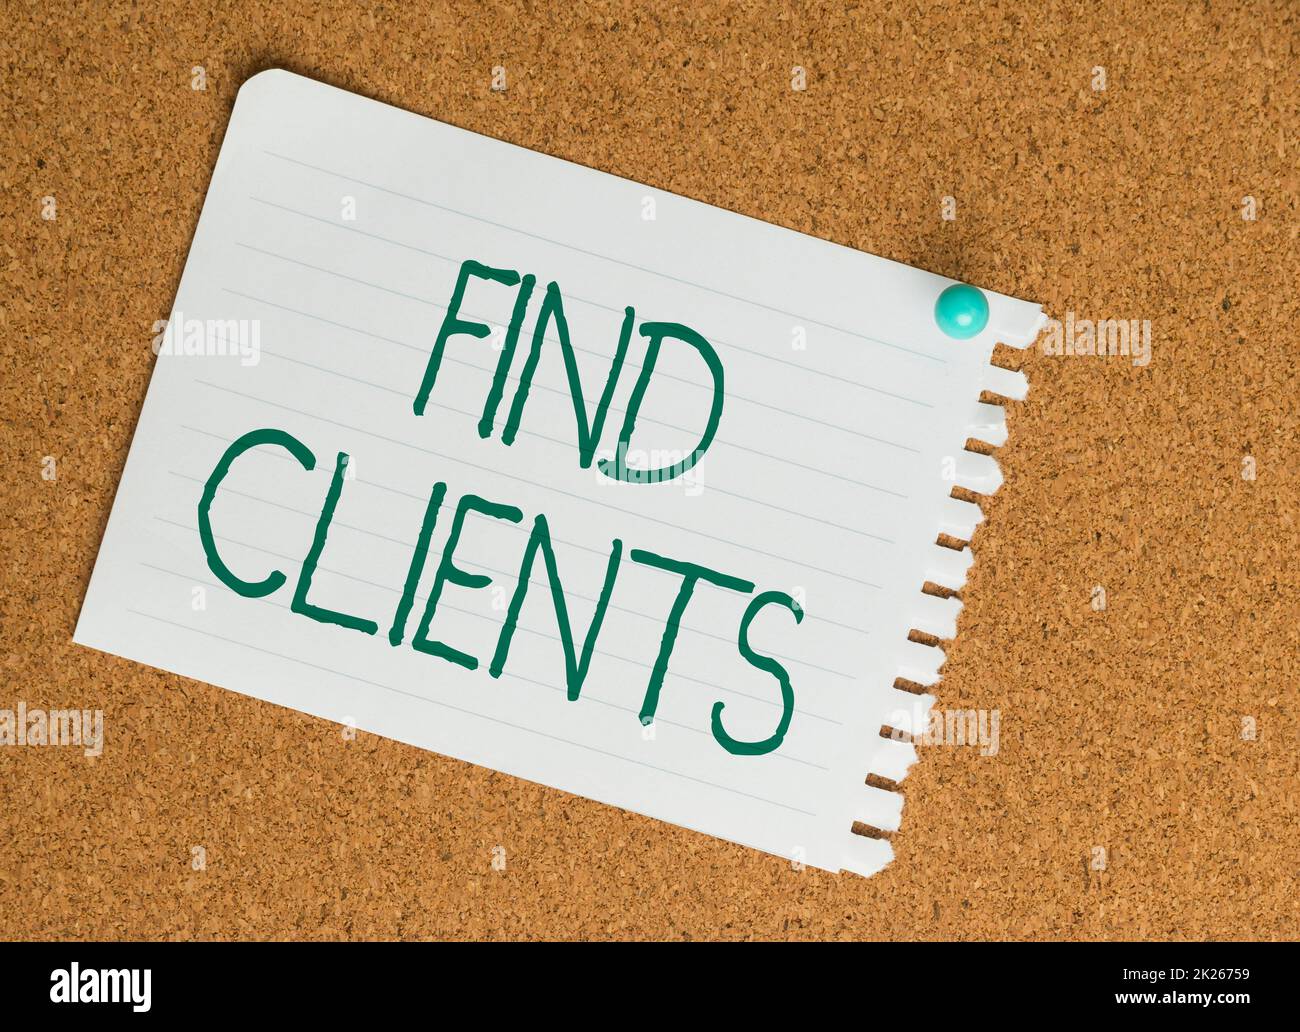 Writing displaying text Find Clients. Word Written on finding prospective customers to buy you goods or services Flashy School Office Supplies, Teaching Learning Collections, Writing Tools Stock Photo